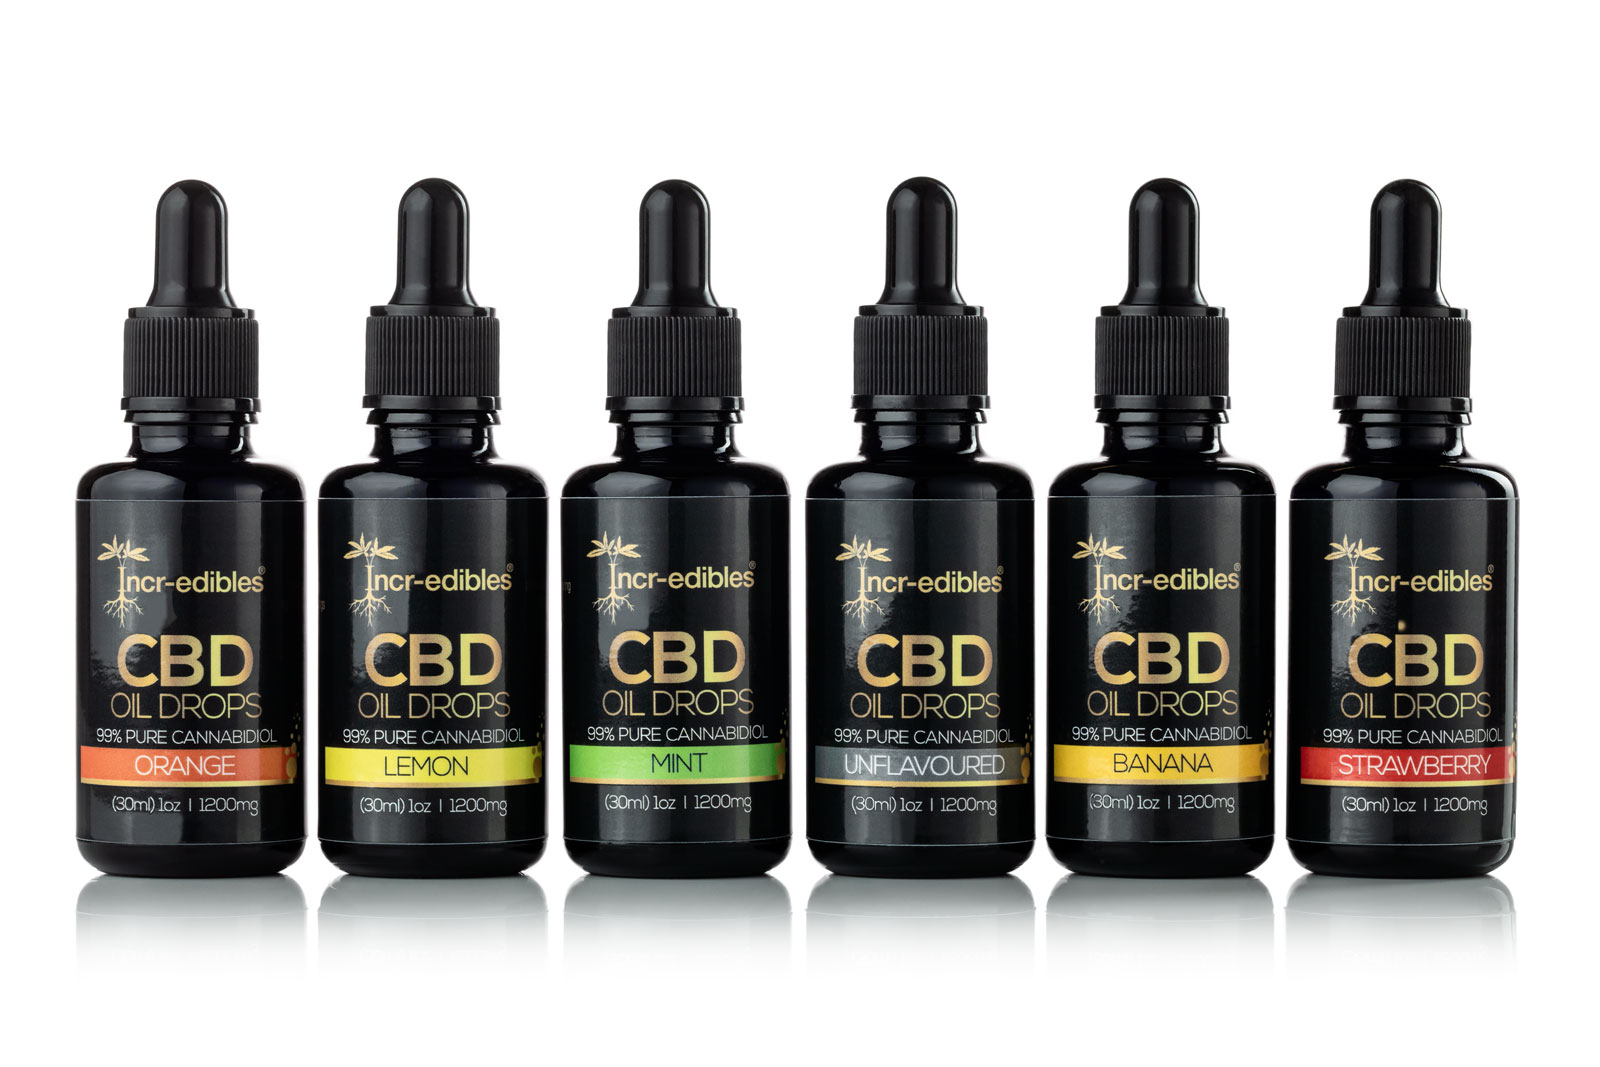 6 x 30ml Flavoured CBD Bottles including Orange, Lemon, Mint, Natural, Banana and Strawberry by Incr-edibles